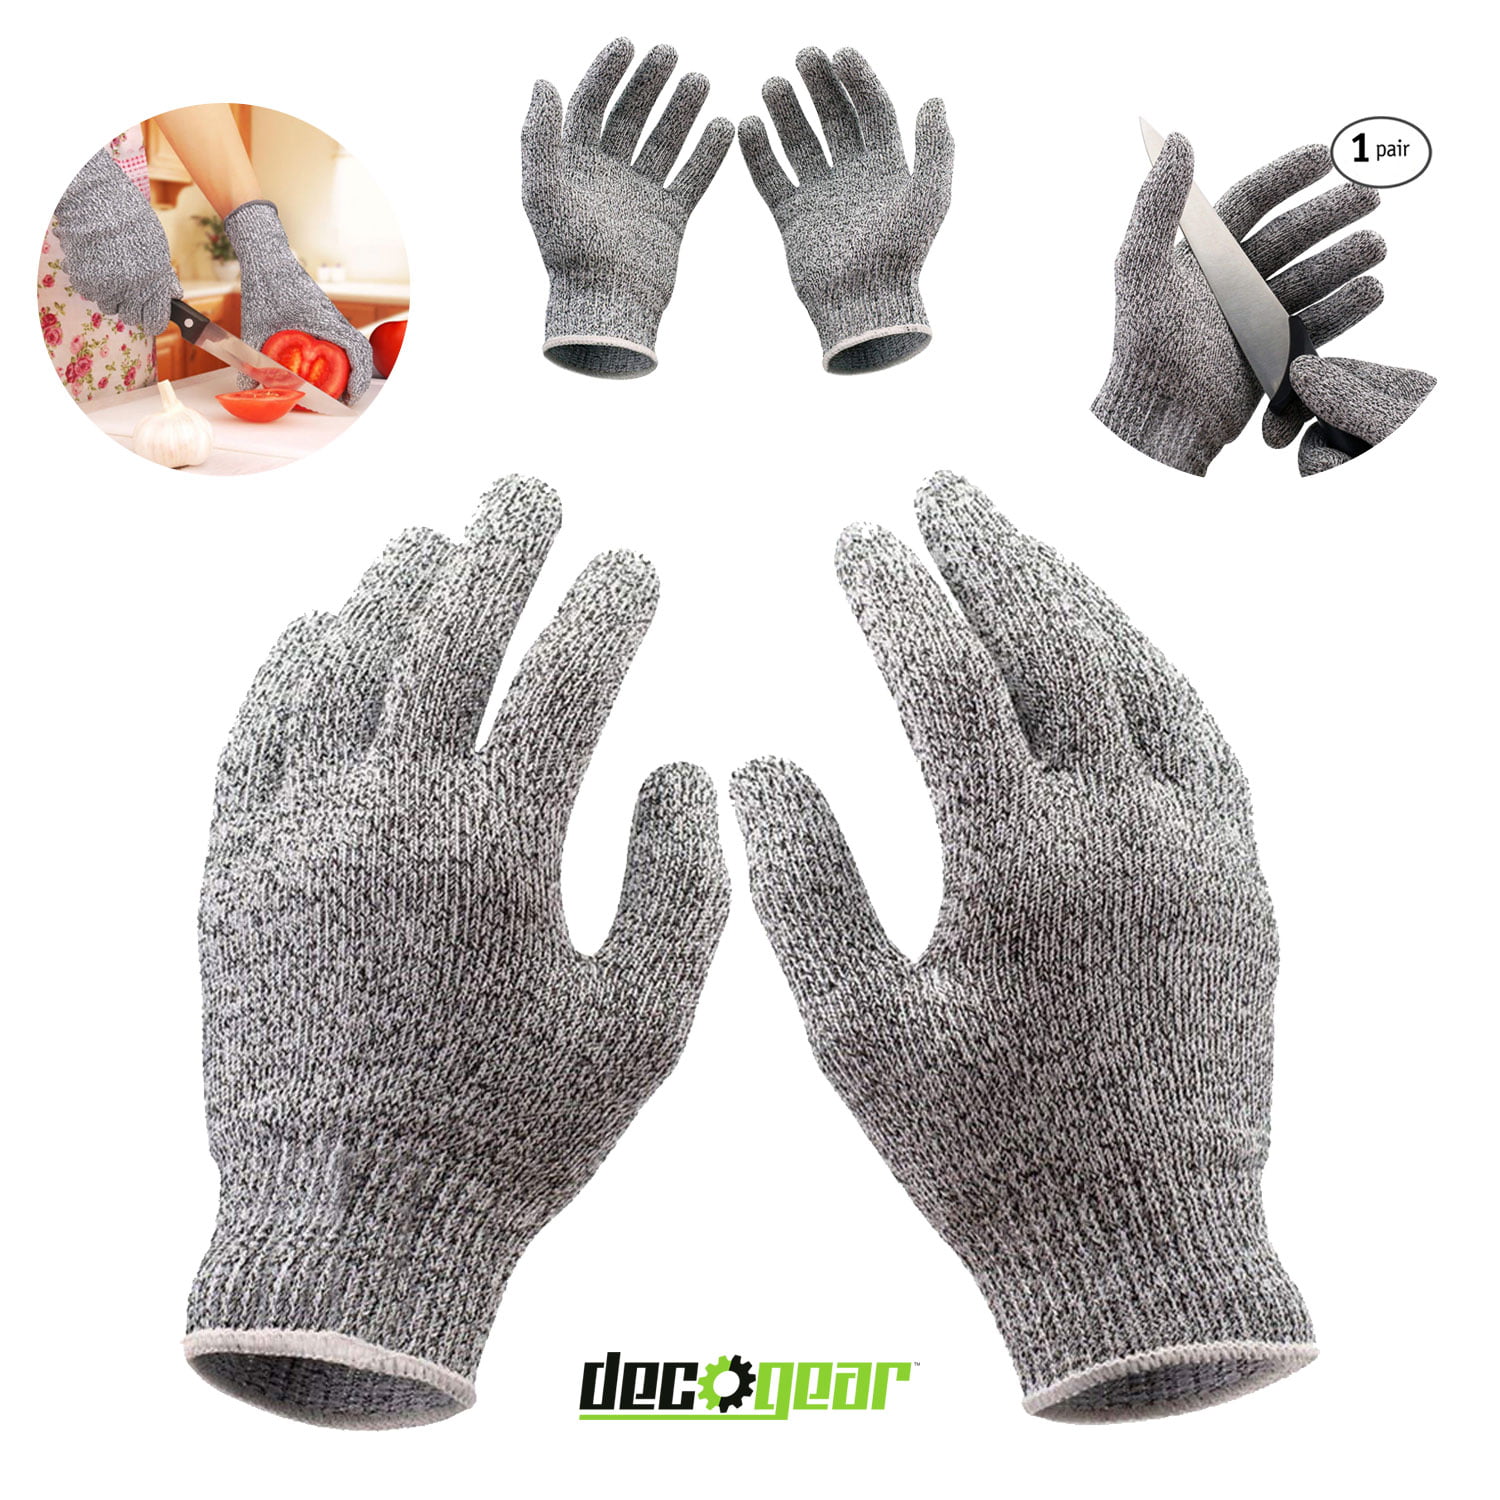 G & F 57100XL CUTShield Classic level 5 Lightweight Cut Resistant Gloves for Kitchen,Food Grade Cut Resistant Gloves XLarge.